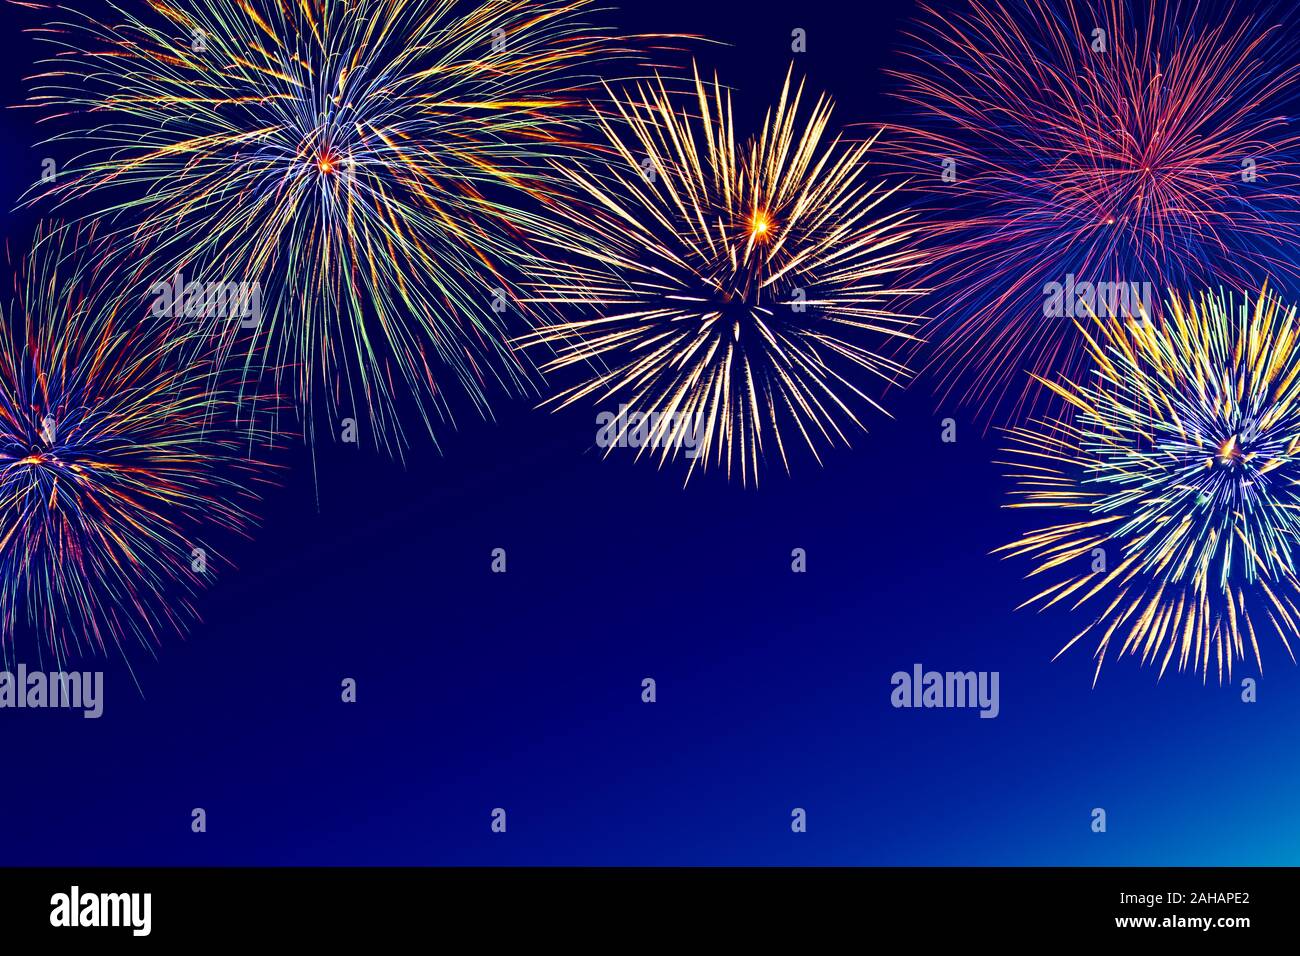 Colorful fireworks over night sky with copy space. Stock Photo